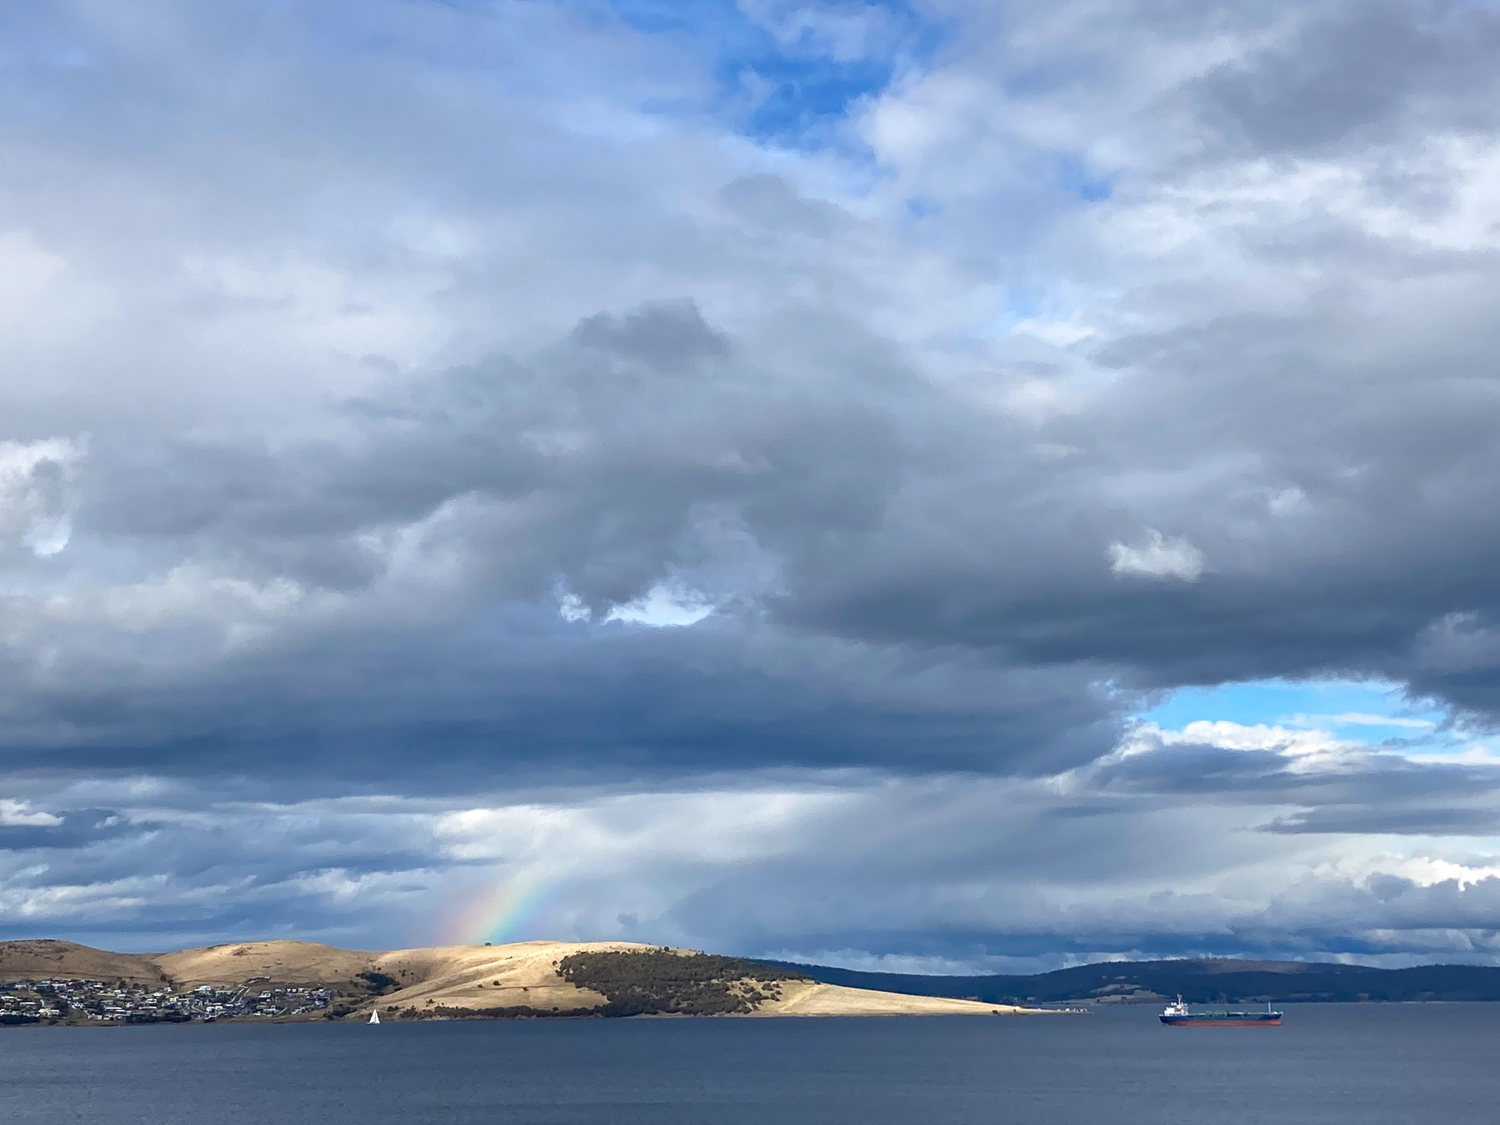 A small land mass across the river with a partial rainbow and heavy cloud cover